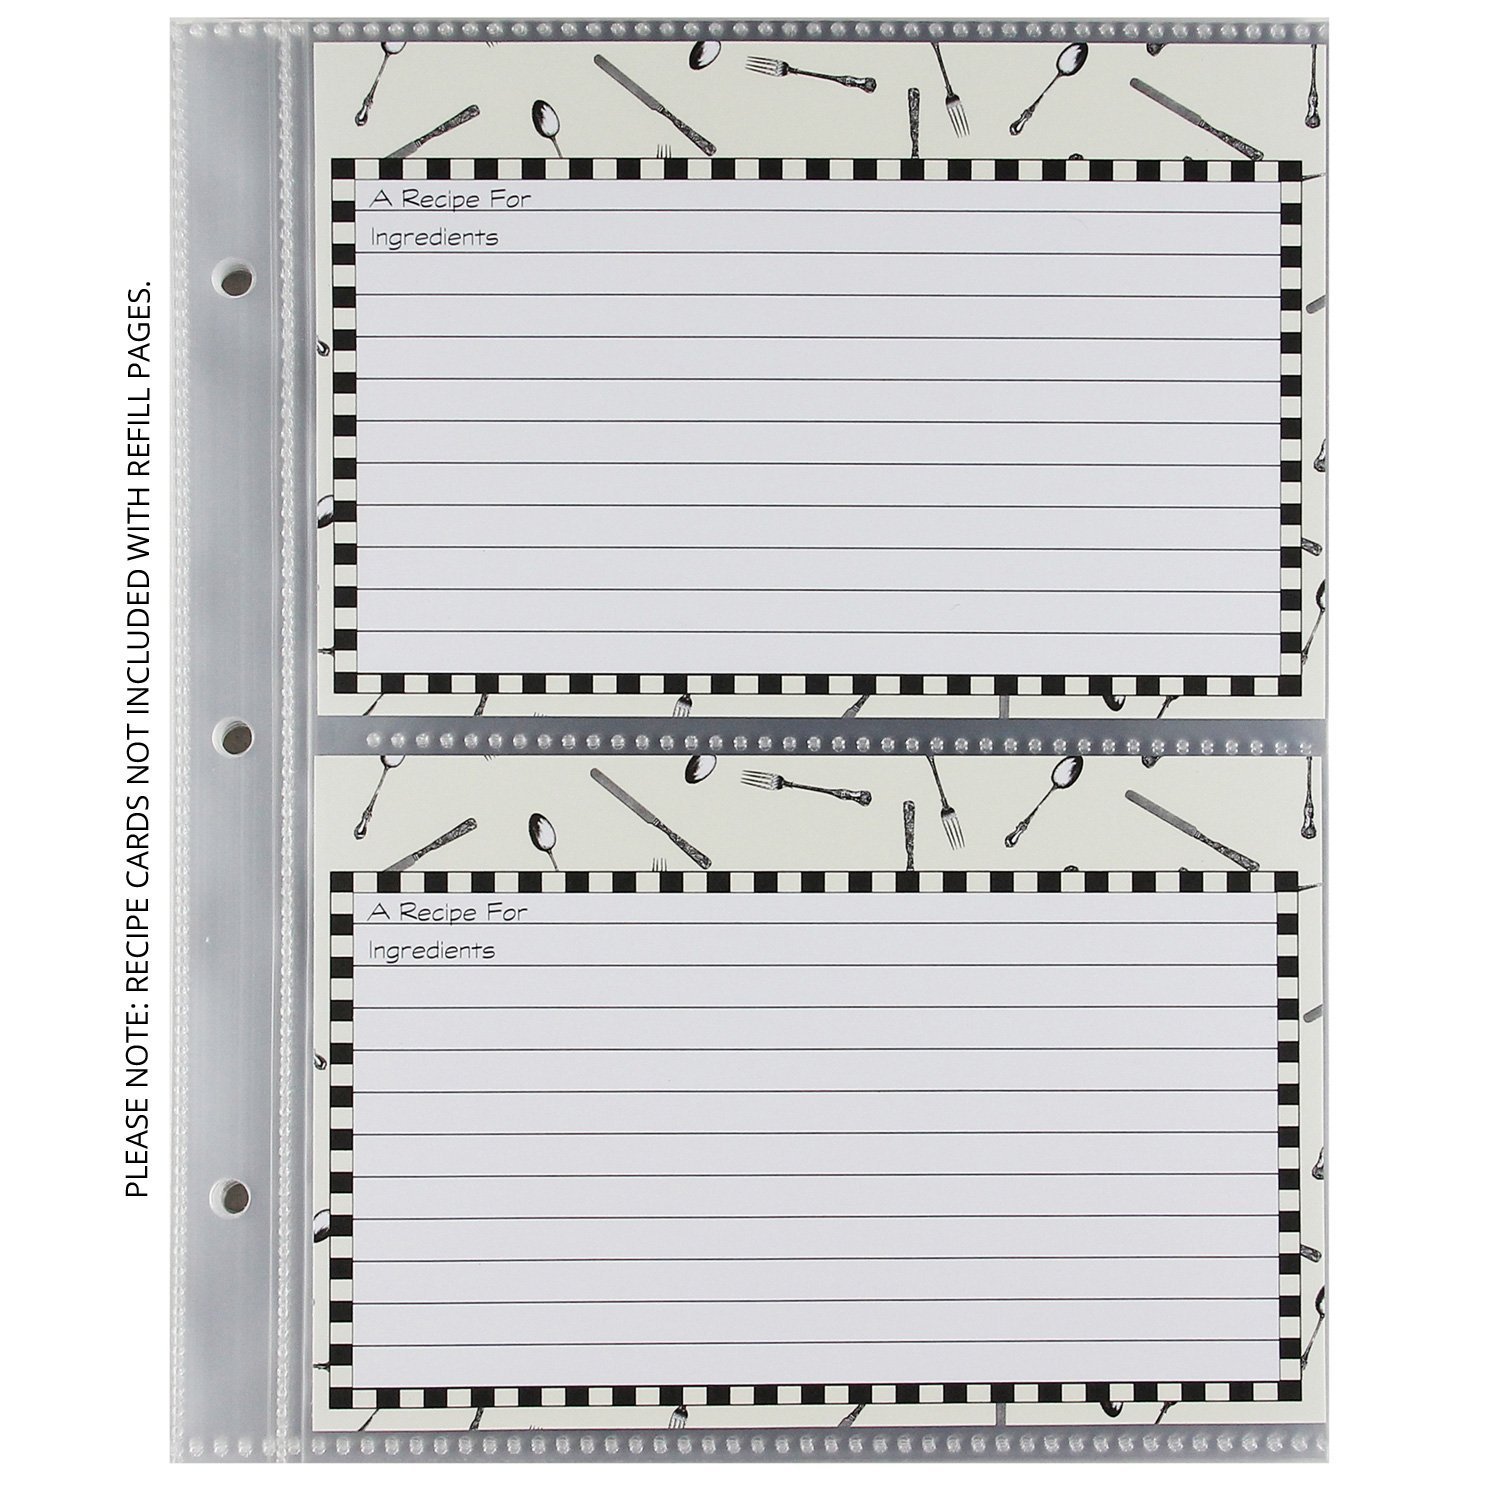 CR Gibson QP-12 Small Recipe Book Pocket Page Refill 20 sheets